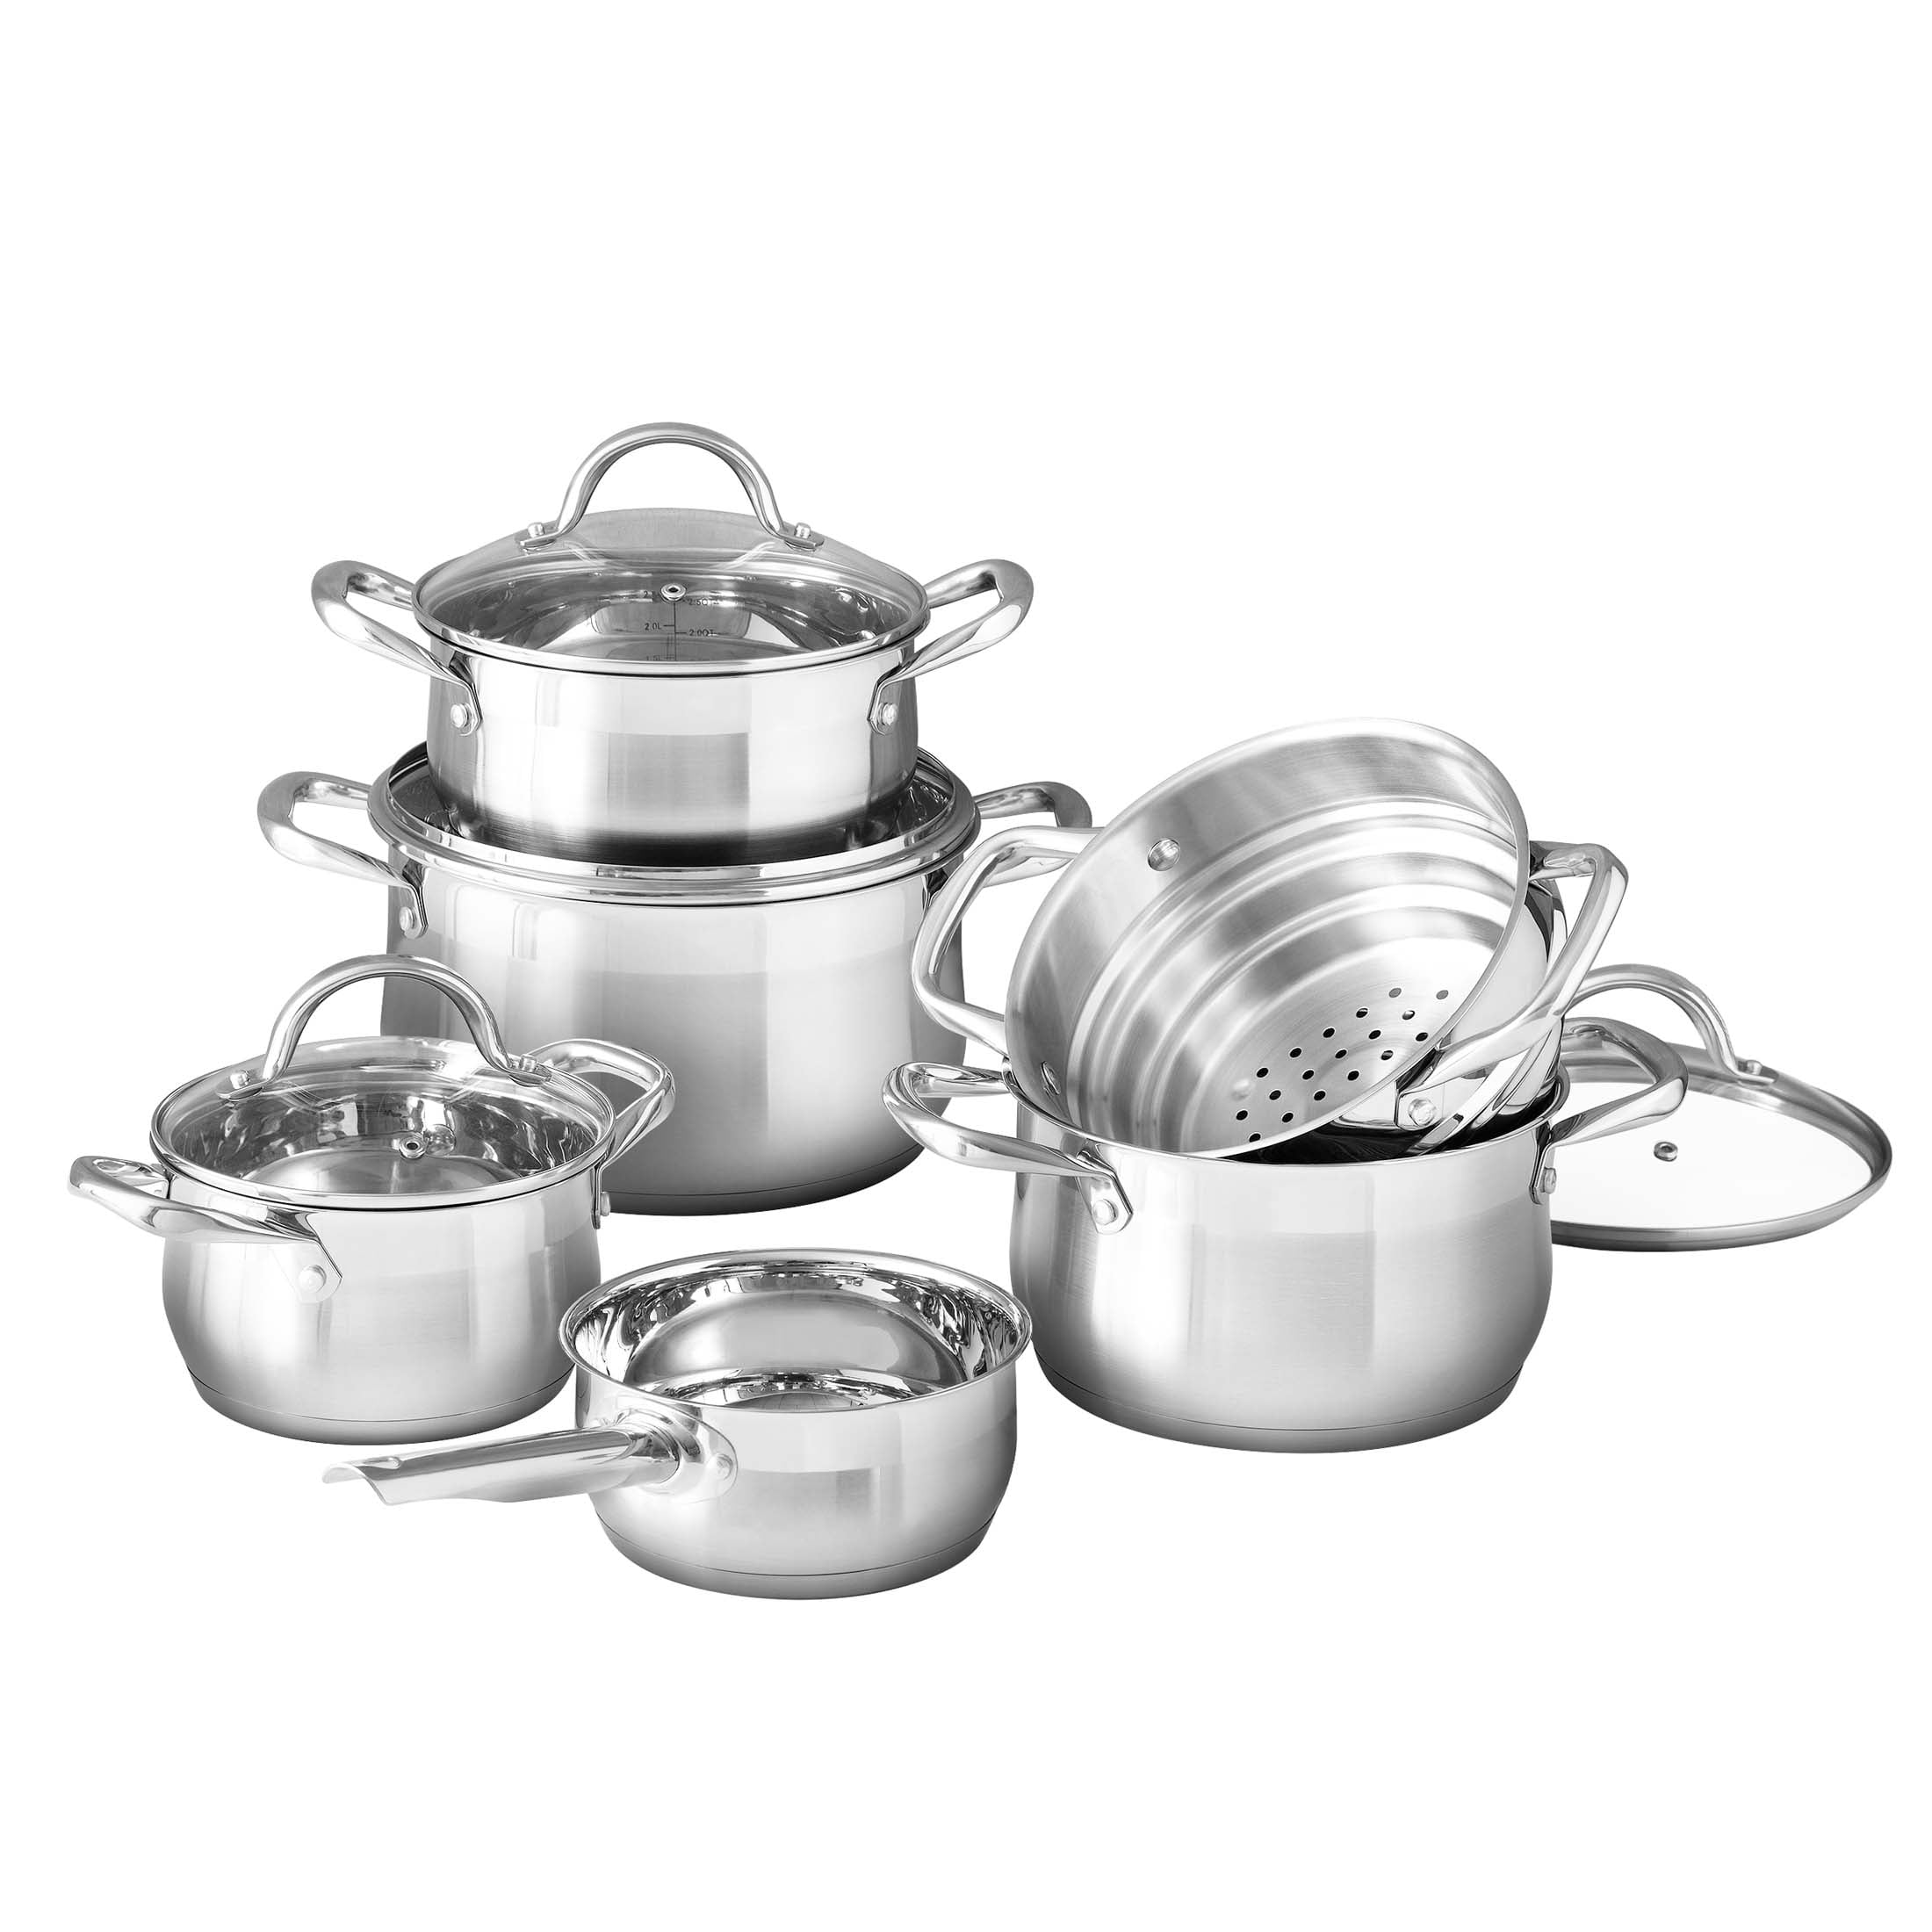 10 Piece Pieces Cookware Sets with Kitchen Tools Silver Stainless Steel 18 